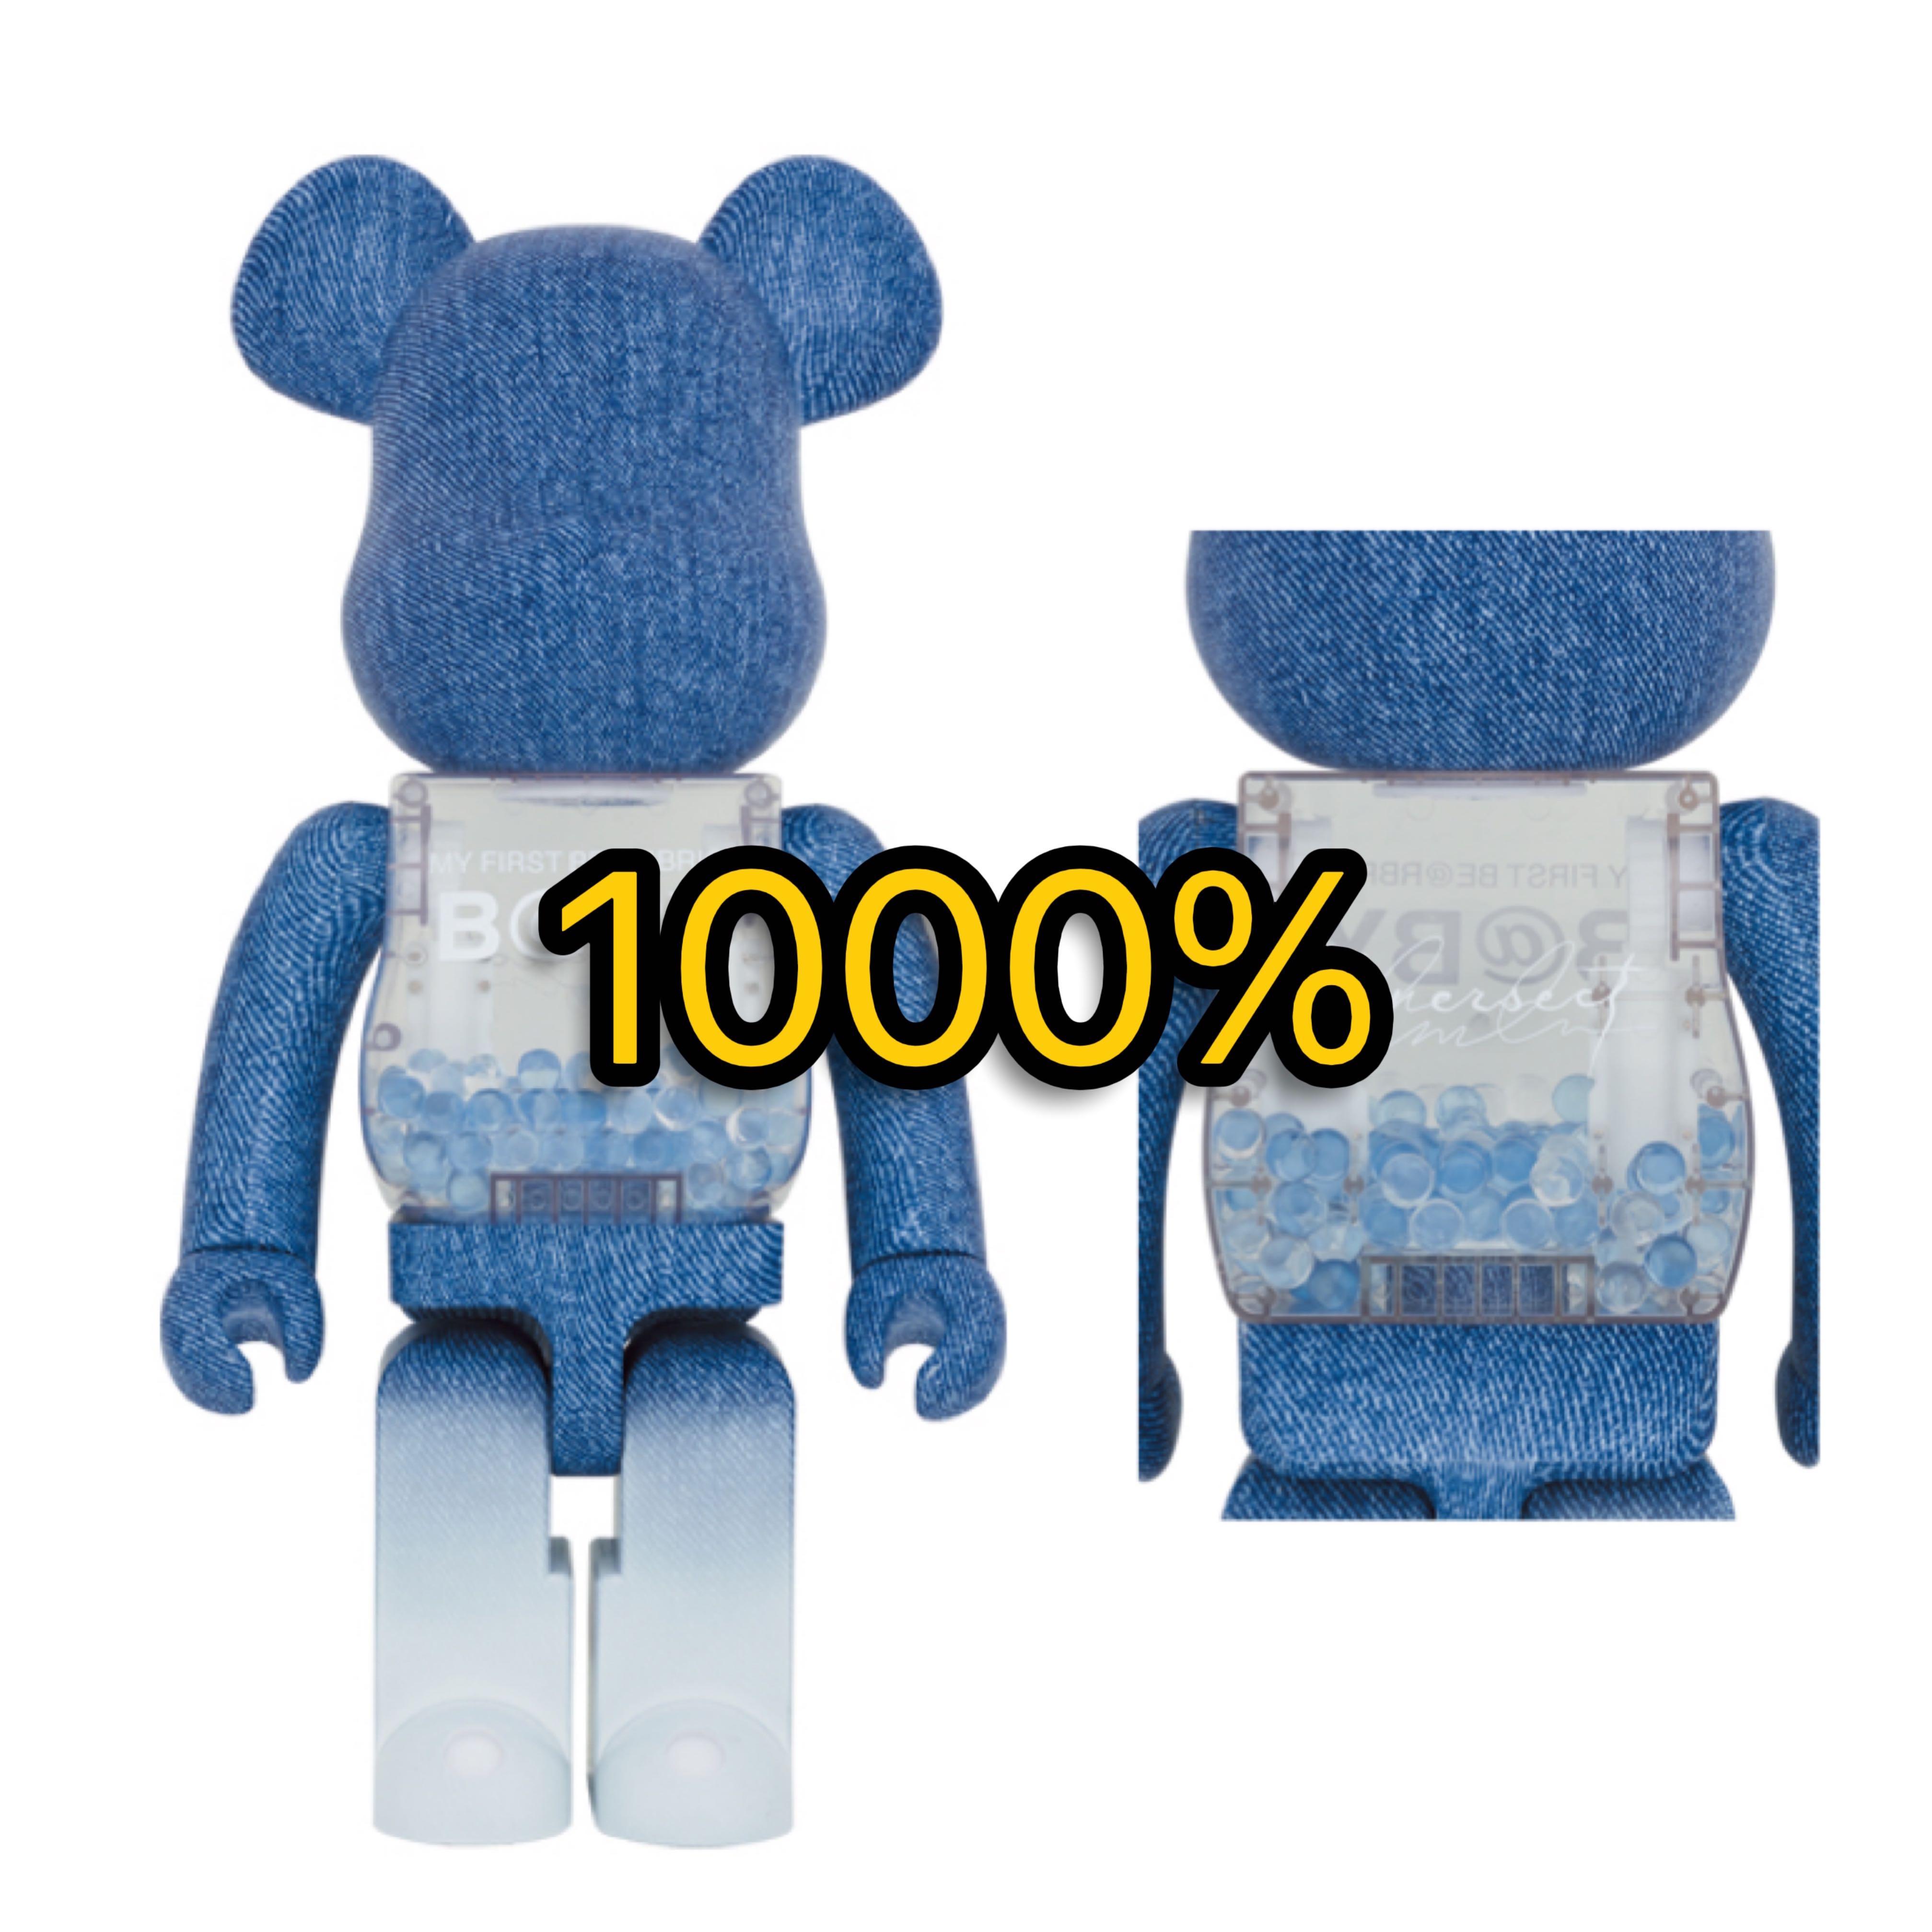 1000％ MY FIRST BE@RBRICK B@BY INNERSECT 2021, 興趣及遊戲, 玩具